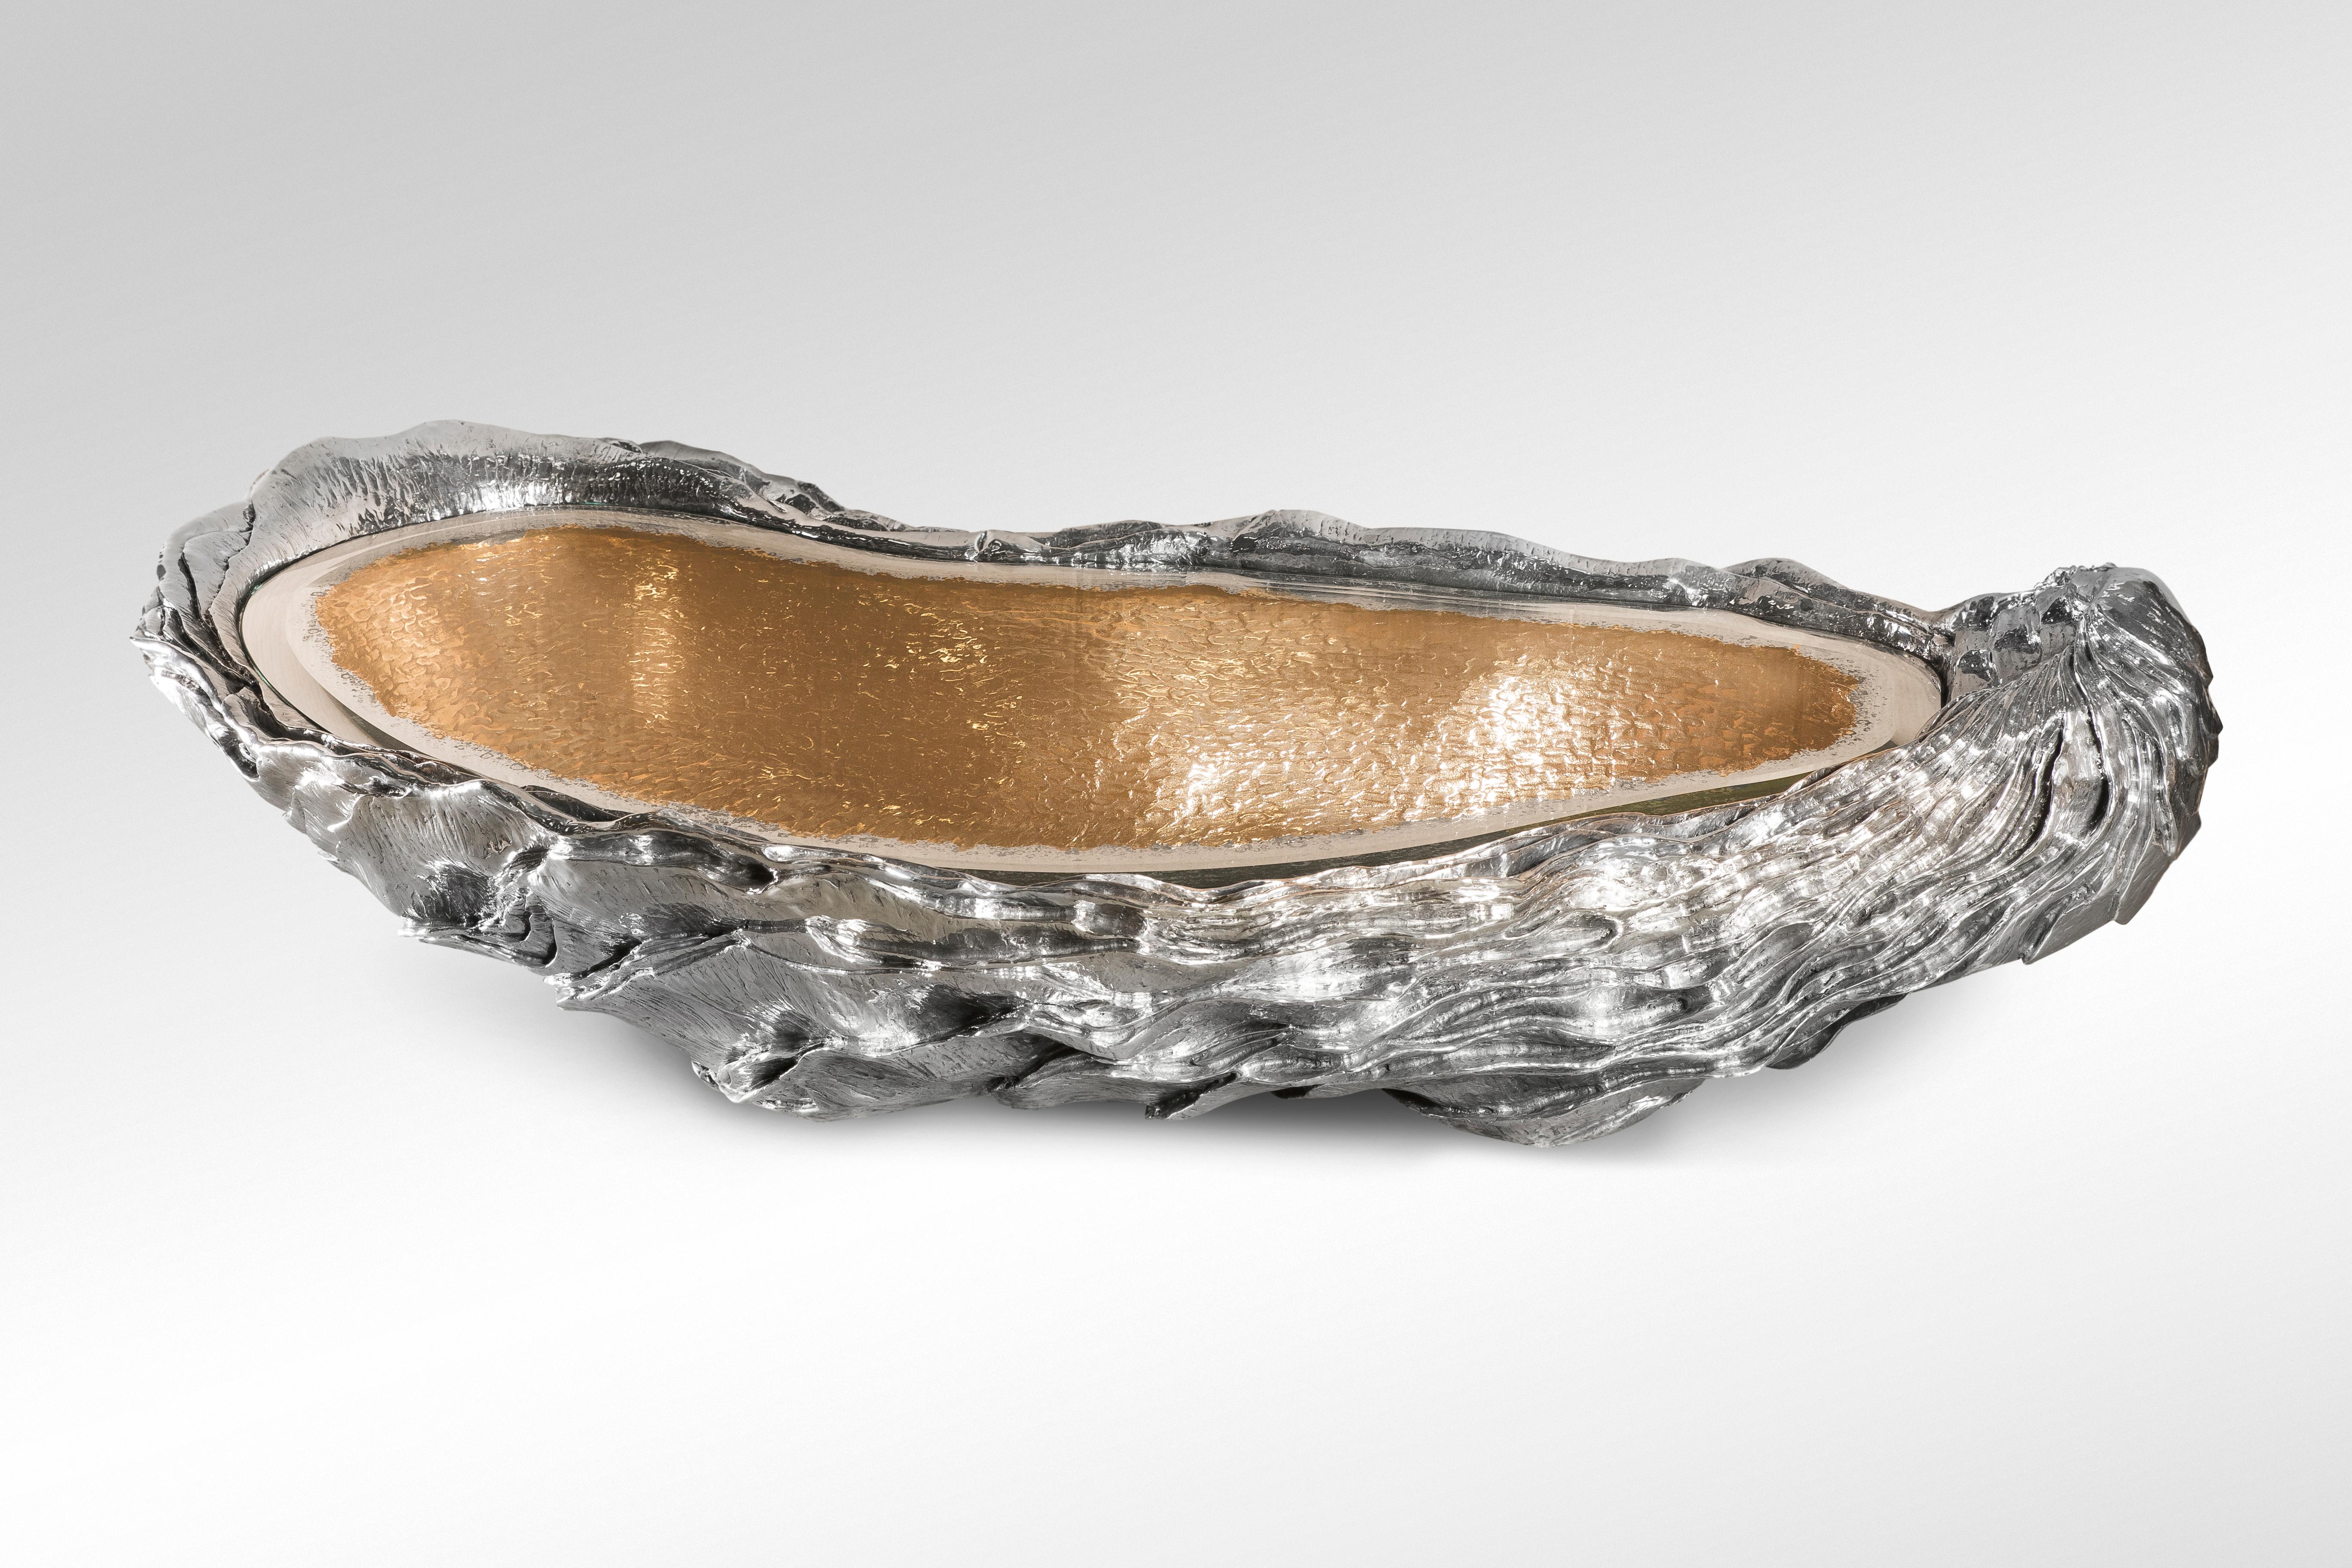 Low table made of polished bronze and aluminium with a faceted glass mirror surface.
The oyster, symbolizes a primal connection to our prehistoric past and serves as a poignant reminder of the raw power of nature.

This piece was presented for the